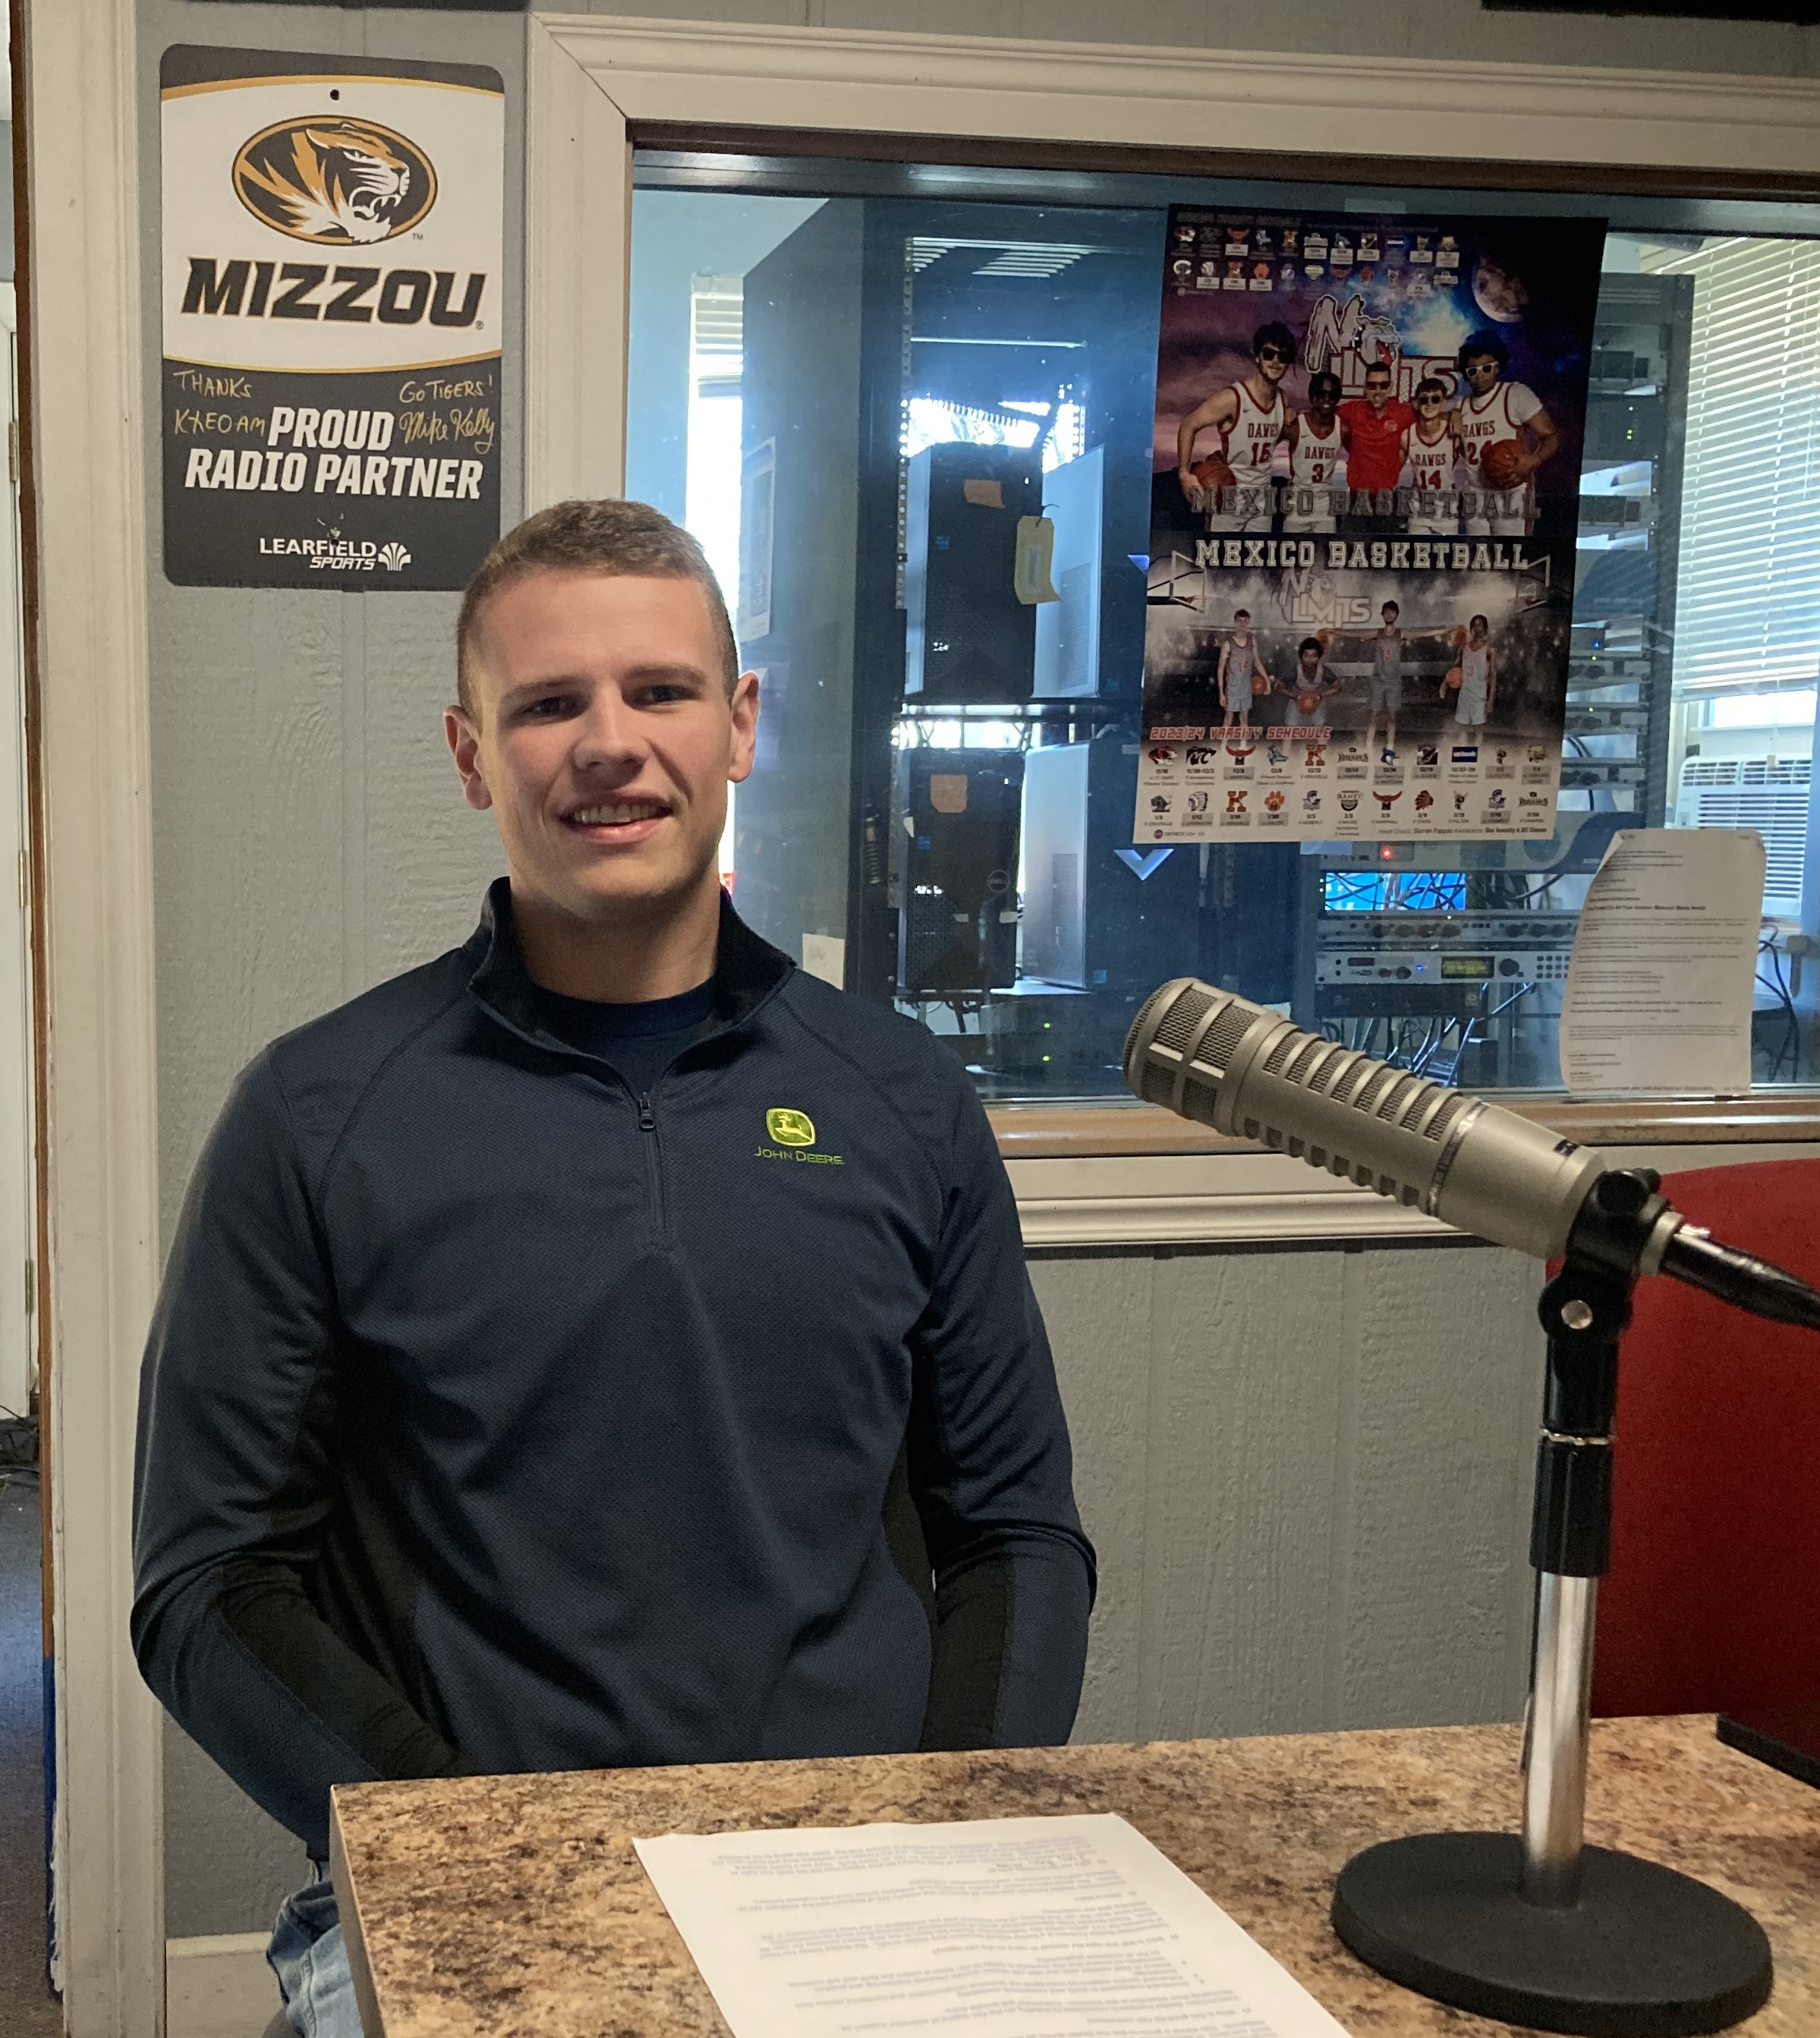 Chase Monte Talks Sydenstricker Nobbe Expansion To New York On AM 1340 KXEO Am I Awake Morning Show